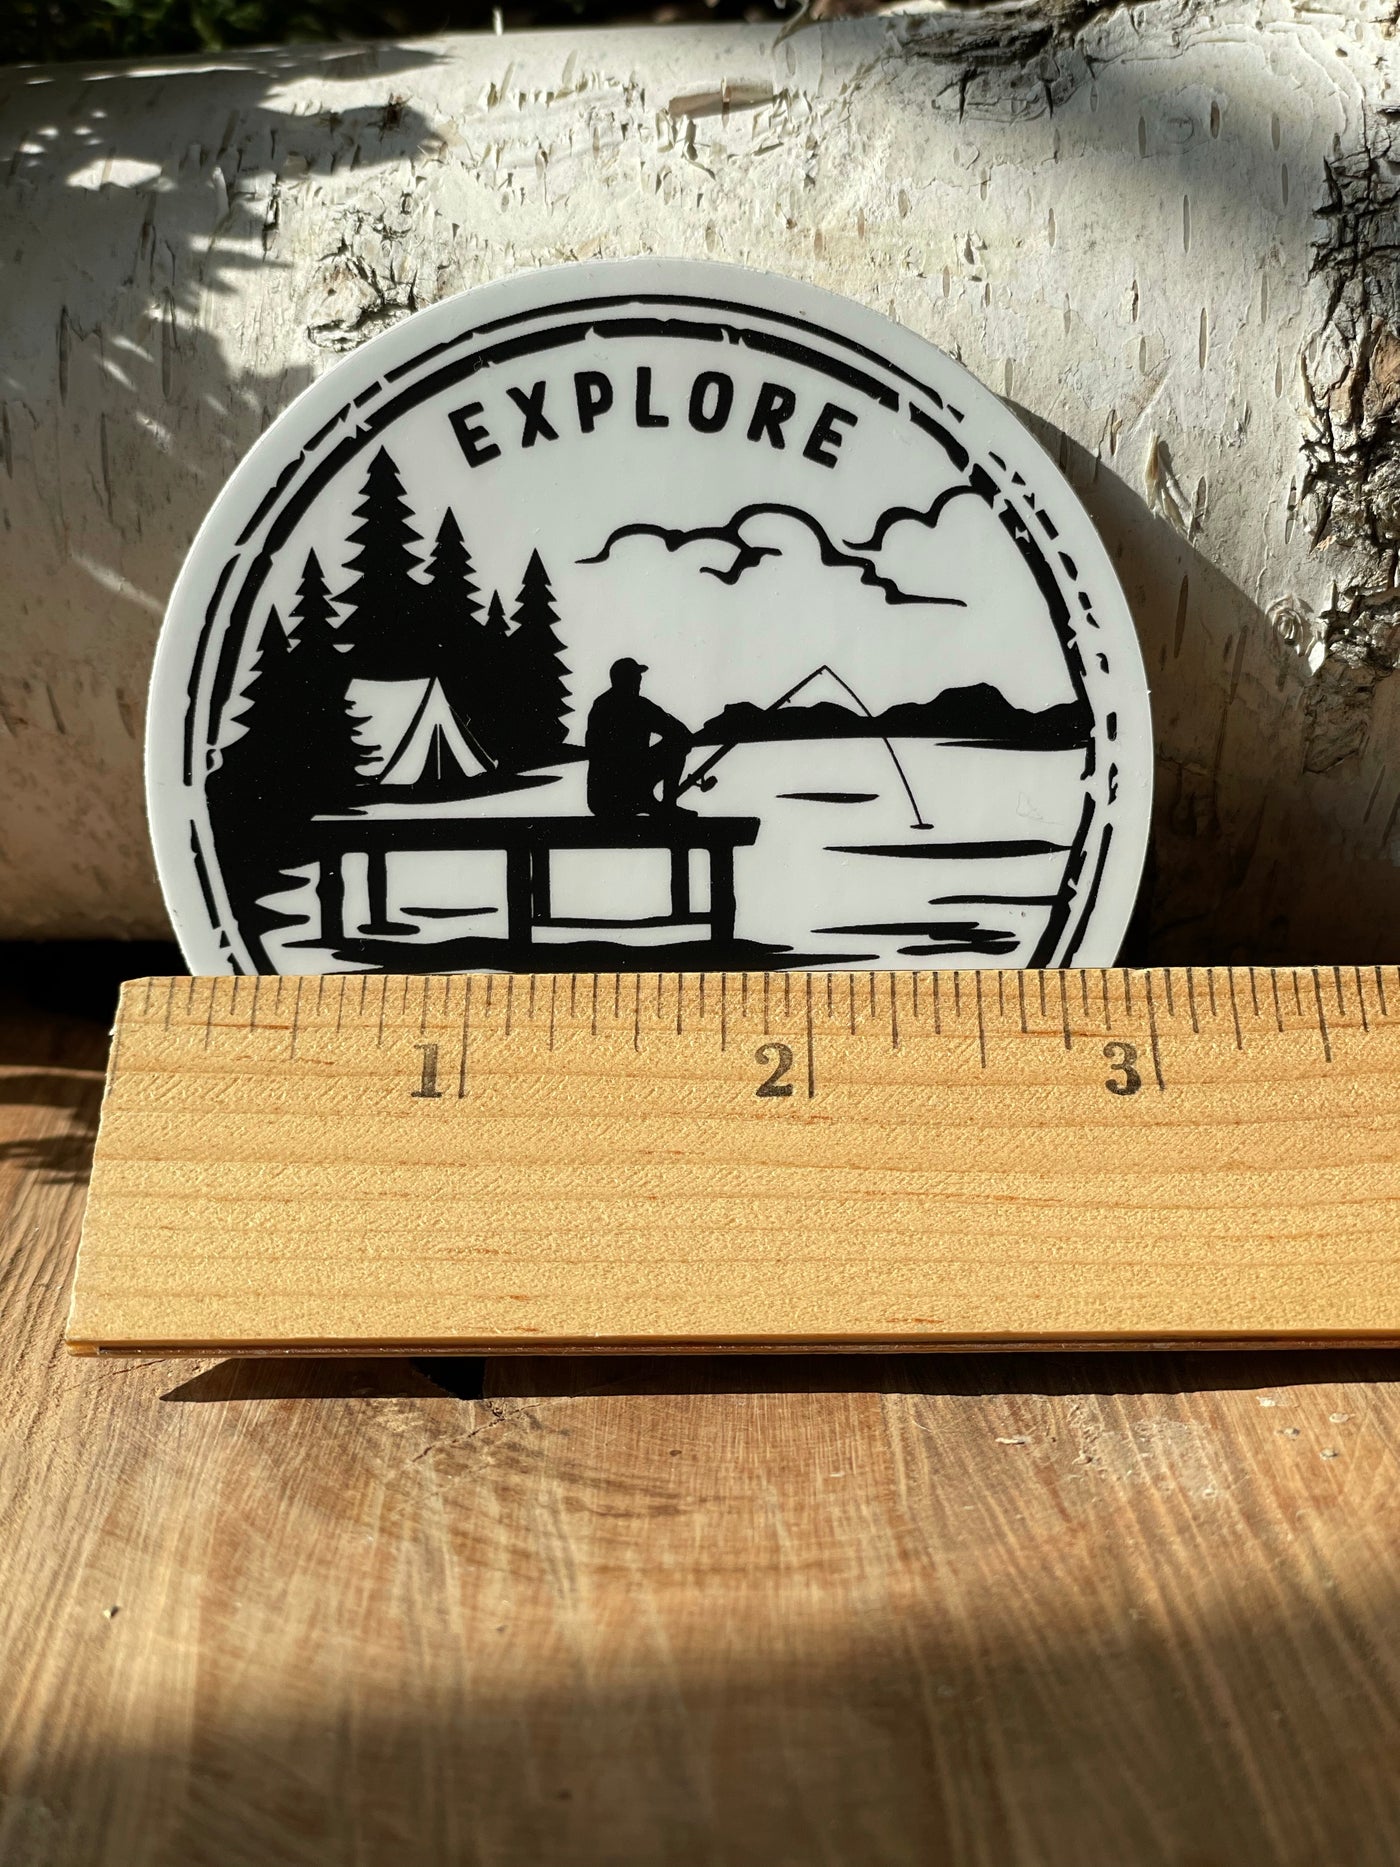 ruler showing the three inch size of the Explore Wisconsin keeper vinyl sticker